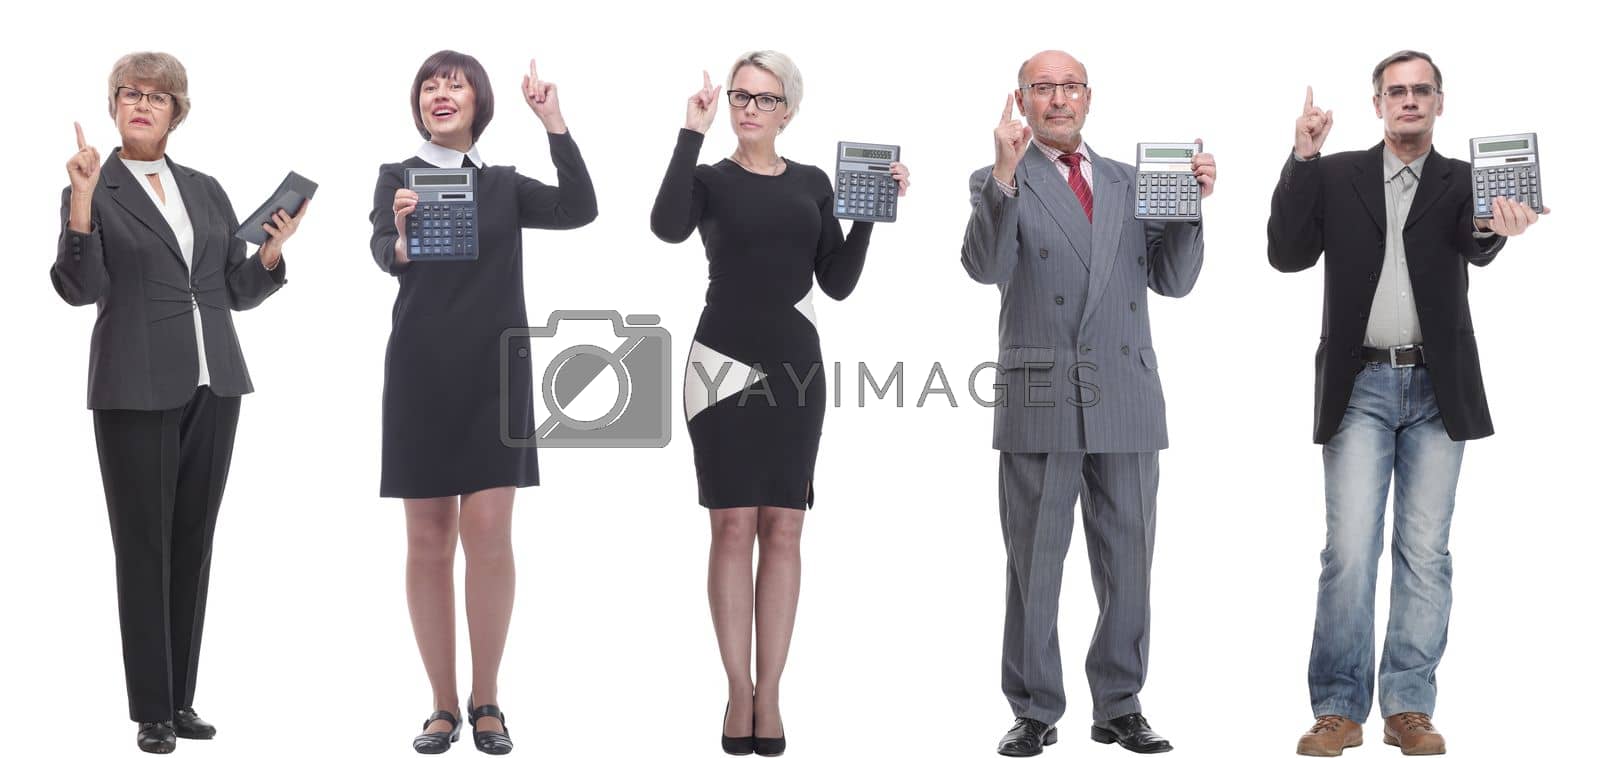 Royalty free image of Collage of people with calculator isolated on white by asdf